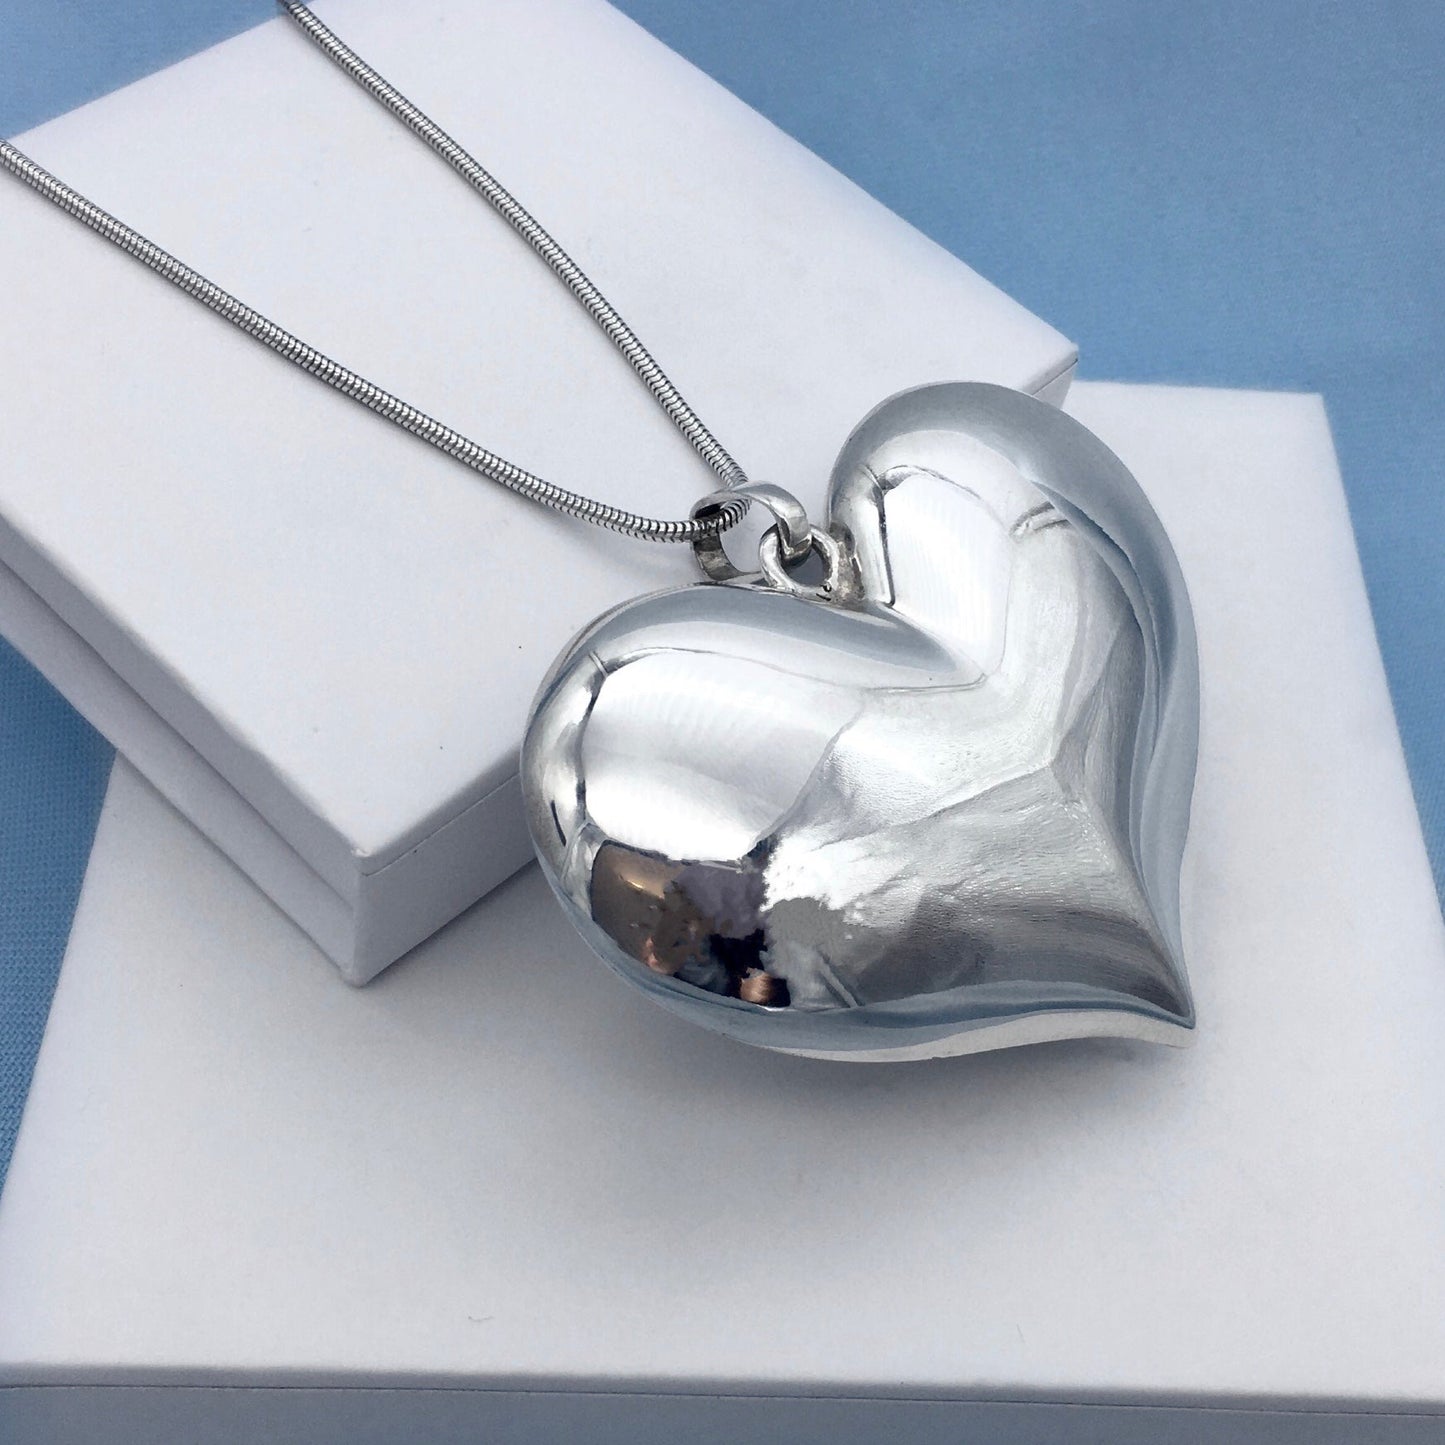 Large Puffy Love Heart Sterling Silver Pendant